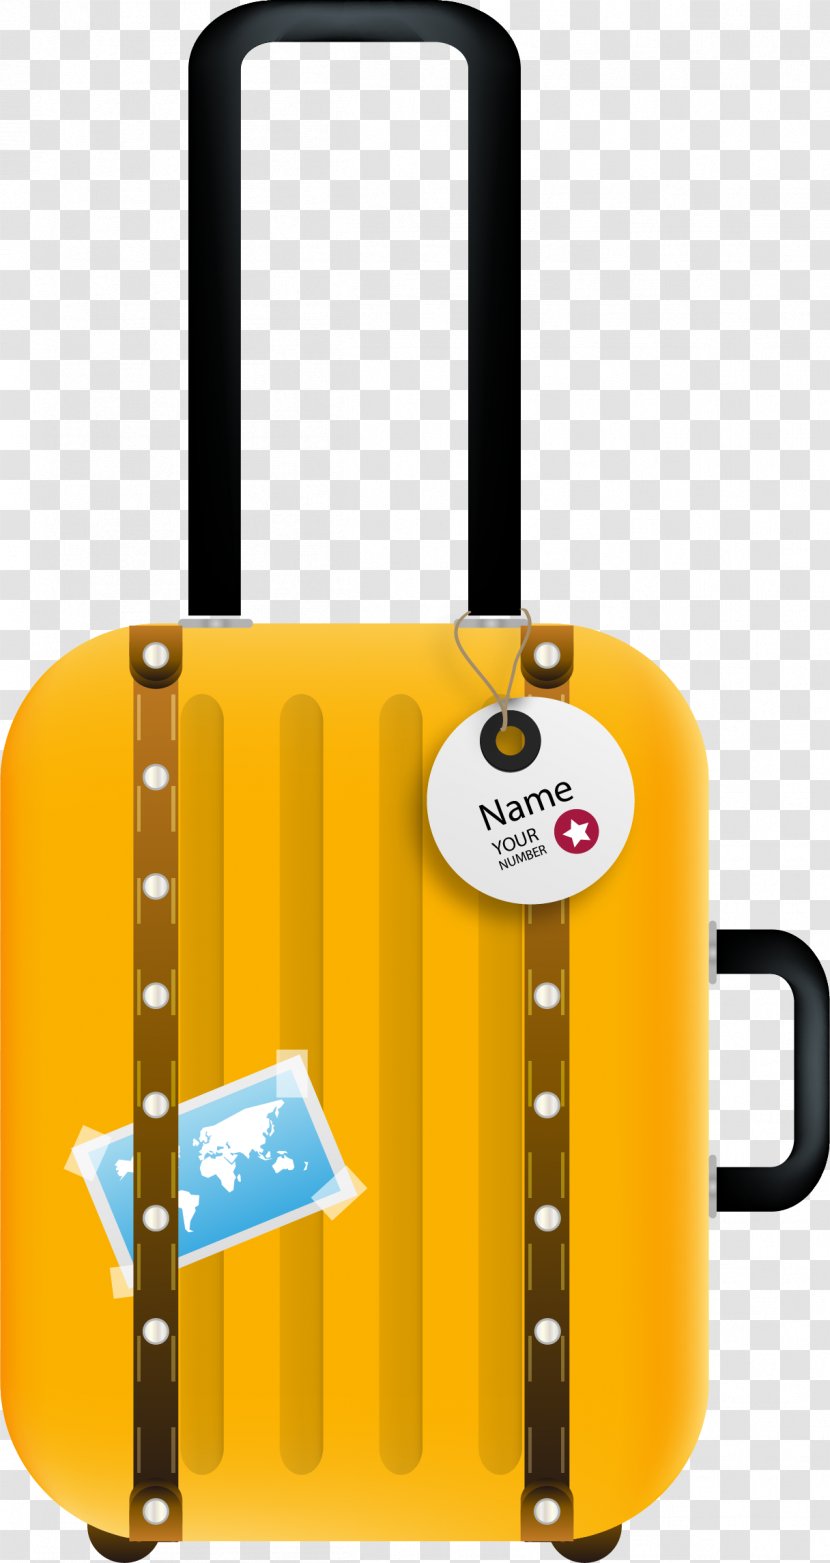 Travel Package Tour Hotel Airline Tourism - Cartoon Hand-painted Suitcase Transparent PNG